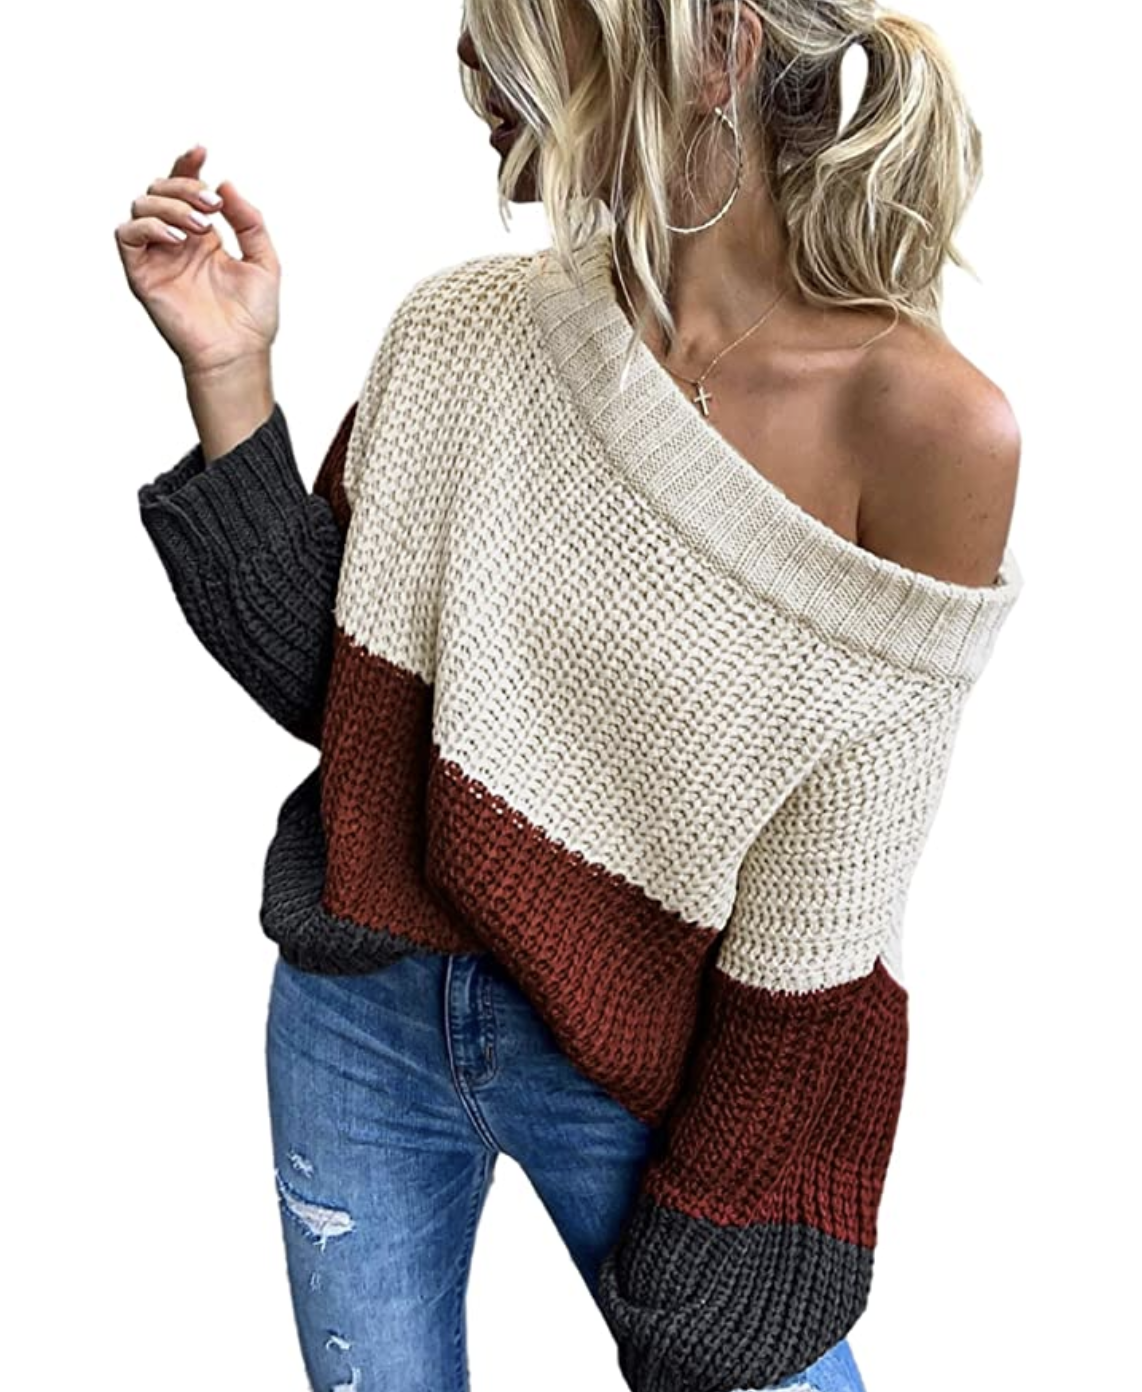 Clients Converse This Off-the-Shoulder Sweater Is a Compliment Magnet